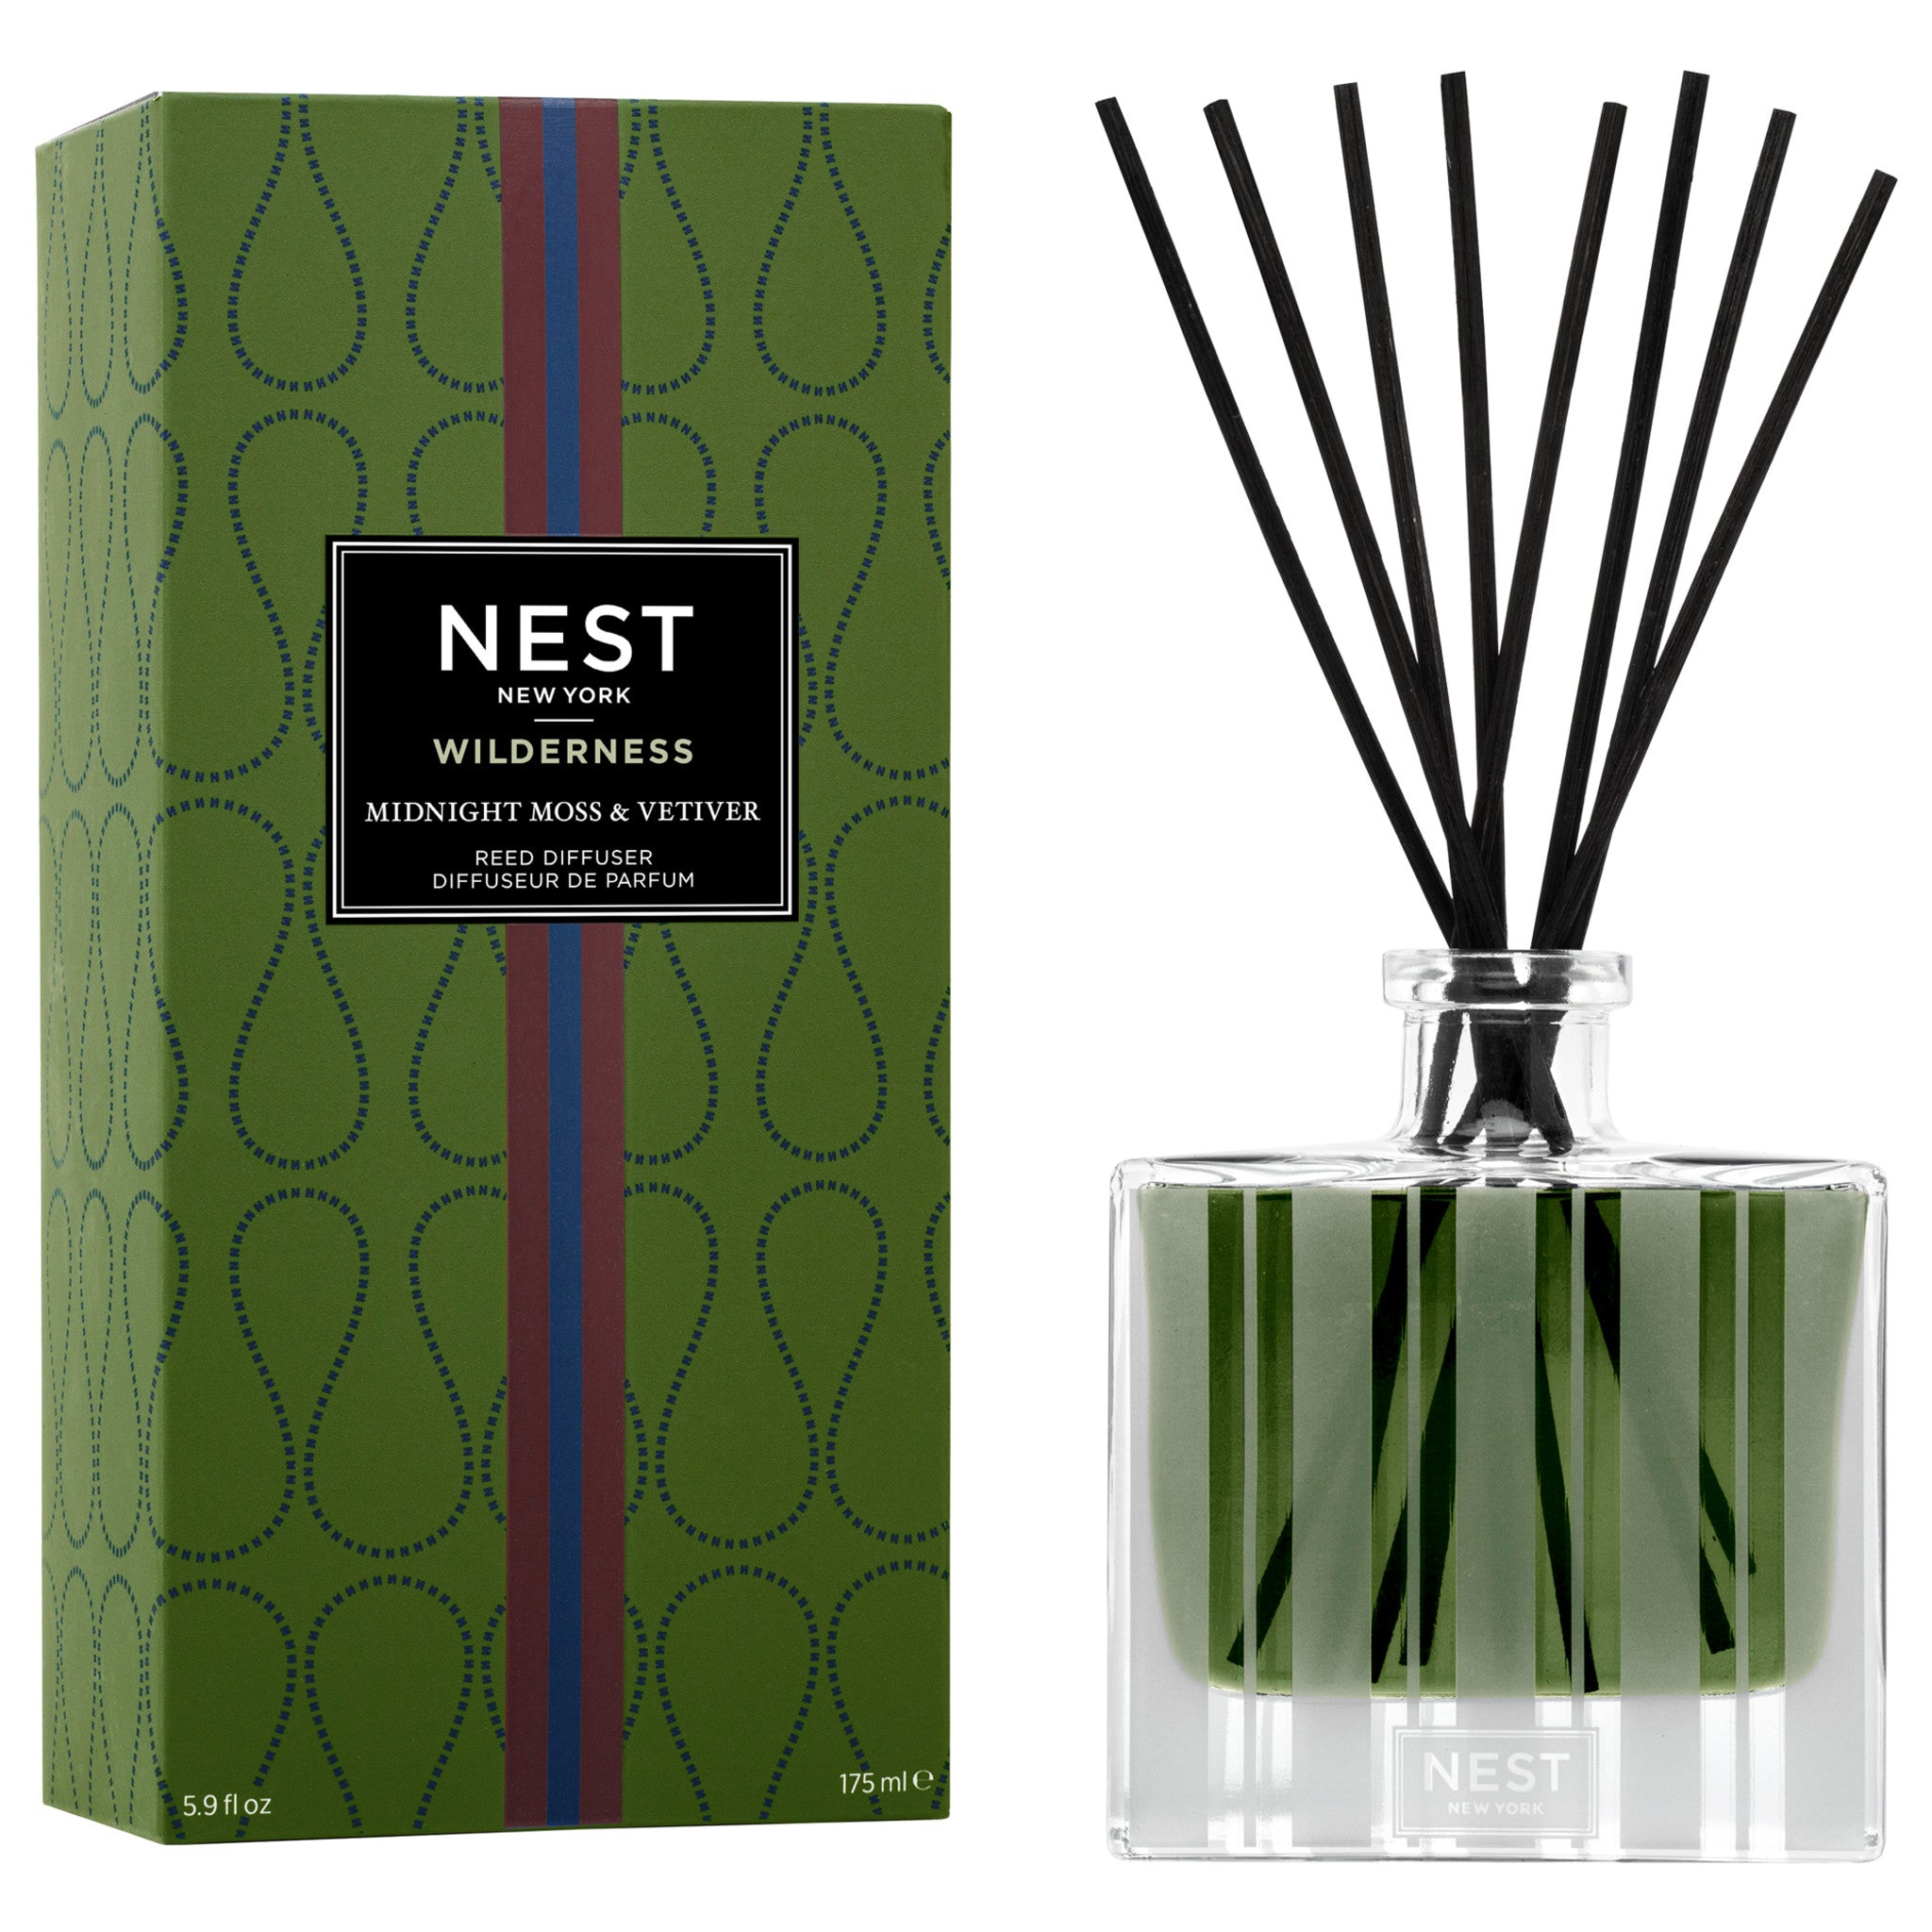 Wilderness Midnight Moss & Vetiver Reed Diffuser main image.